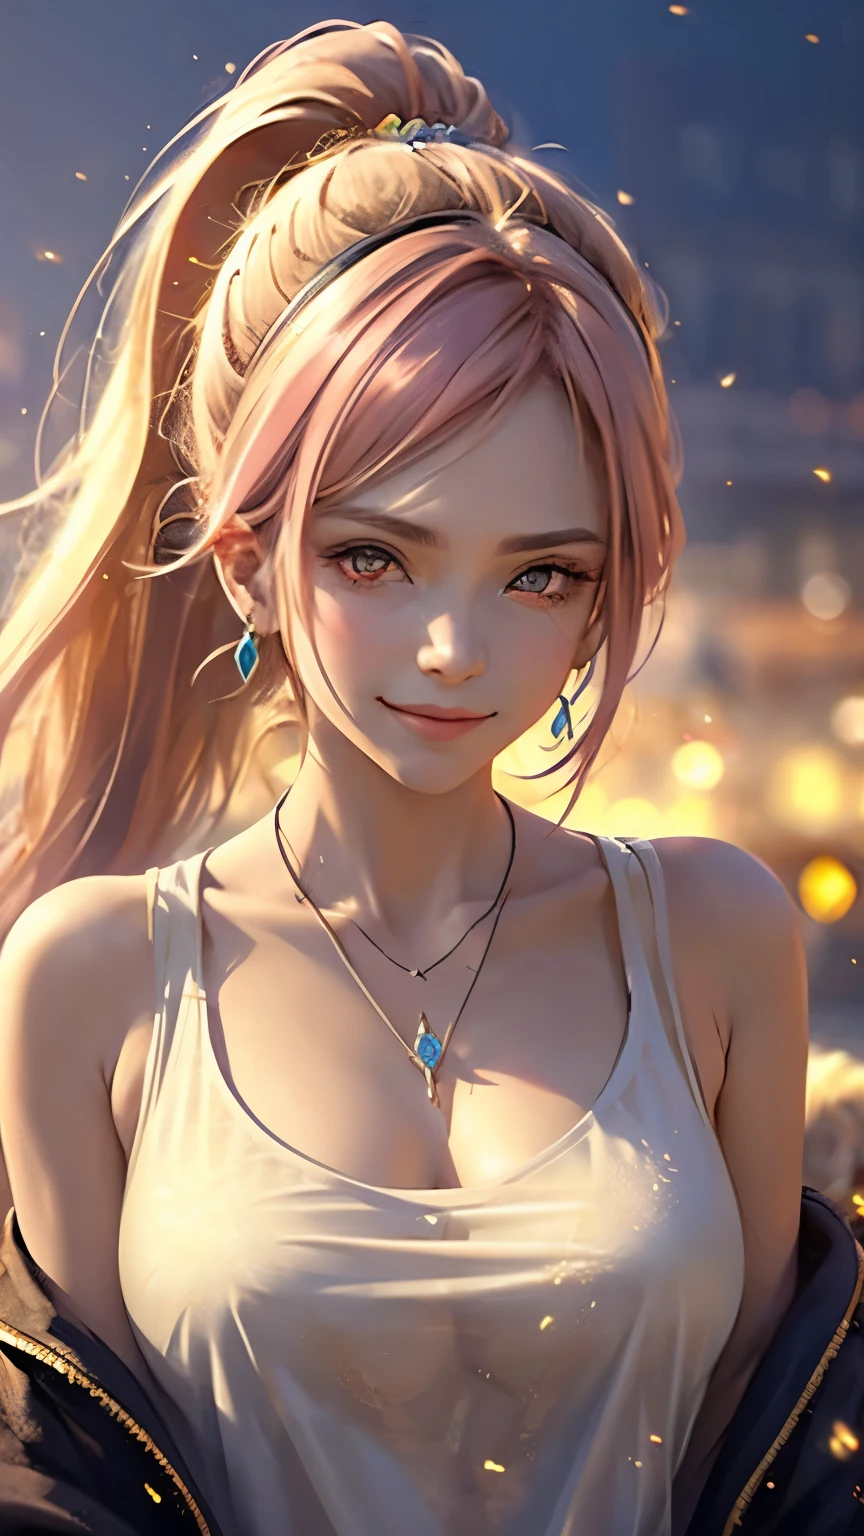 Pink Hair, Front Ponytail, Eye Reflexes, Red contact lenses, Pink Eyes, Heterochromia of the iris，Put on earrings, blue crystal pendant，Wicked Smile, hair band，Attention to detail, Romanticism, Written boundary depth, Shine, Ray Tracing, Viewfinder, Zoom Layer, close, bokeh, Anatomically correct, Attention to details, 1080P, Ultra Hi-Vision
woman，High Ponytail，Oversized T-shirt，More on water patterns on clothes，The expression is solemn，reflected light，
Gorgeous and delicately shining small butterfly hair accessory，Vibrant colors，Detailed engraving，Shine brightly，Attention to detail，The jewelry is of high quality，Very high quality